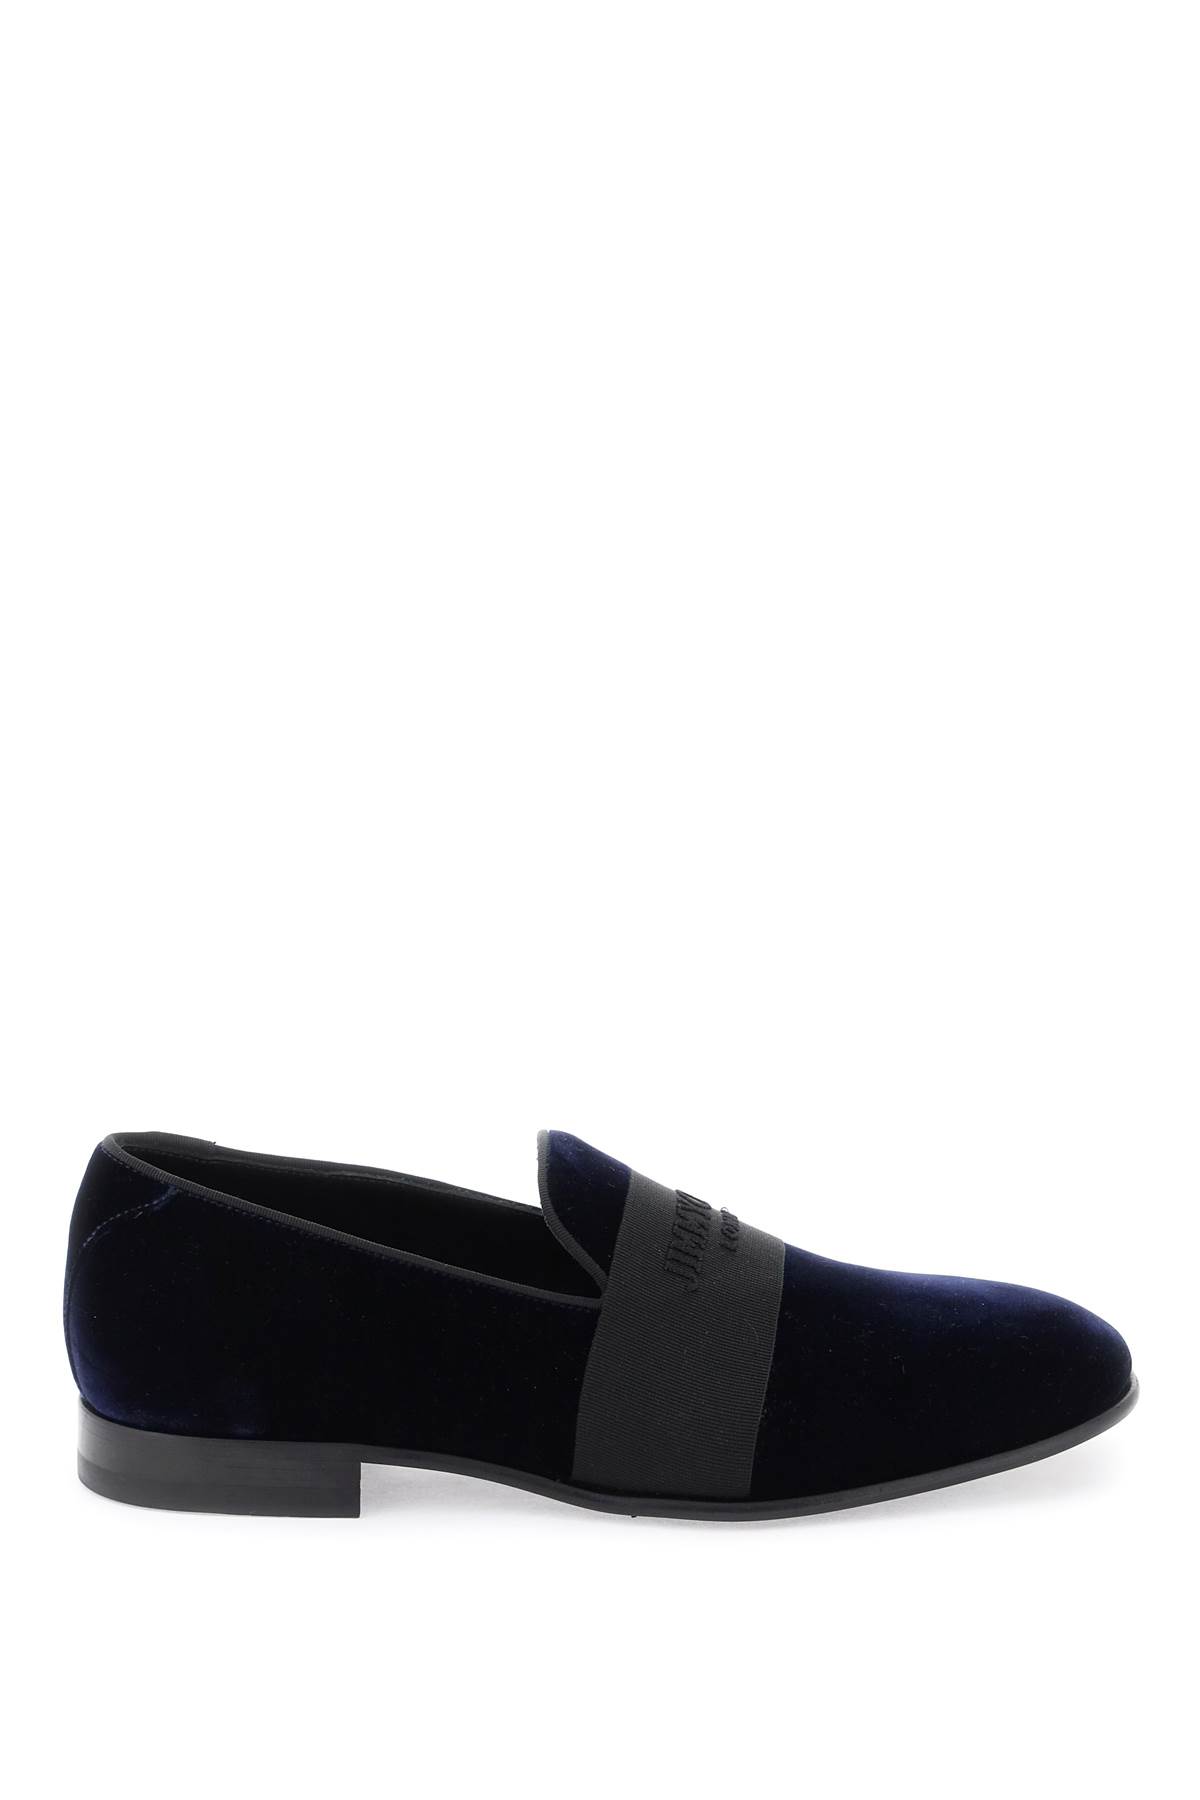 Thame Loafers